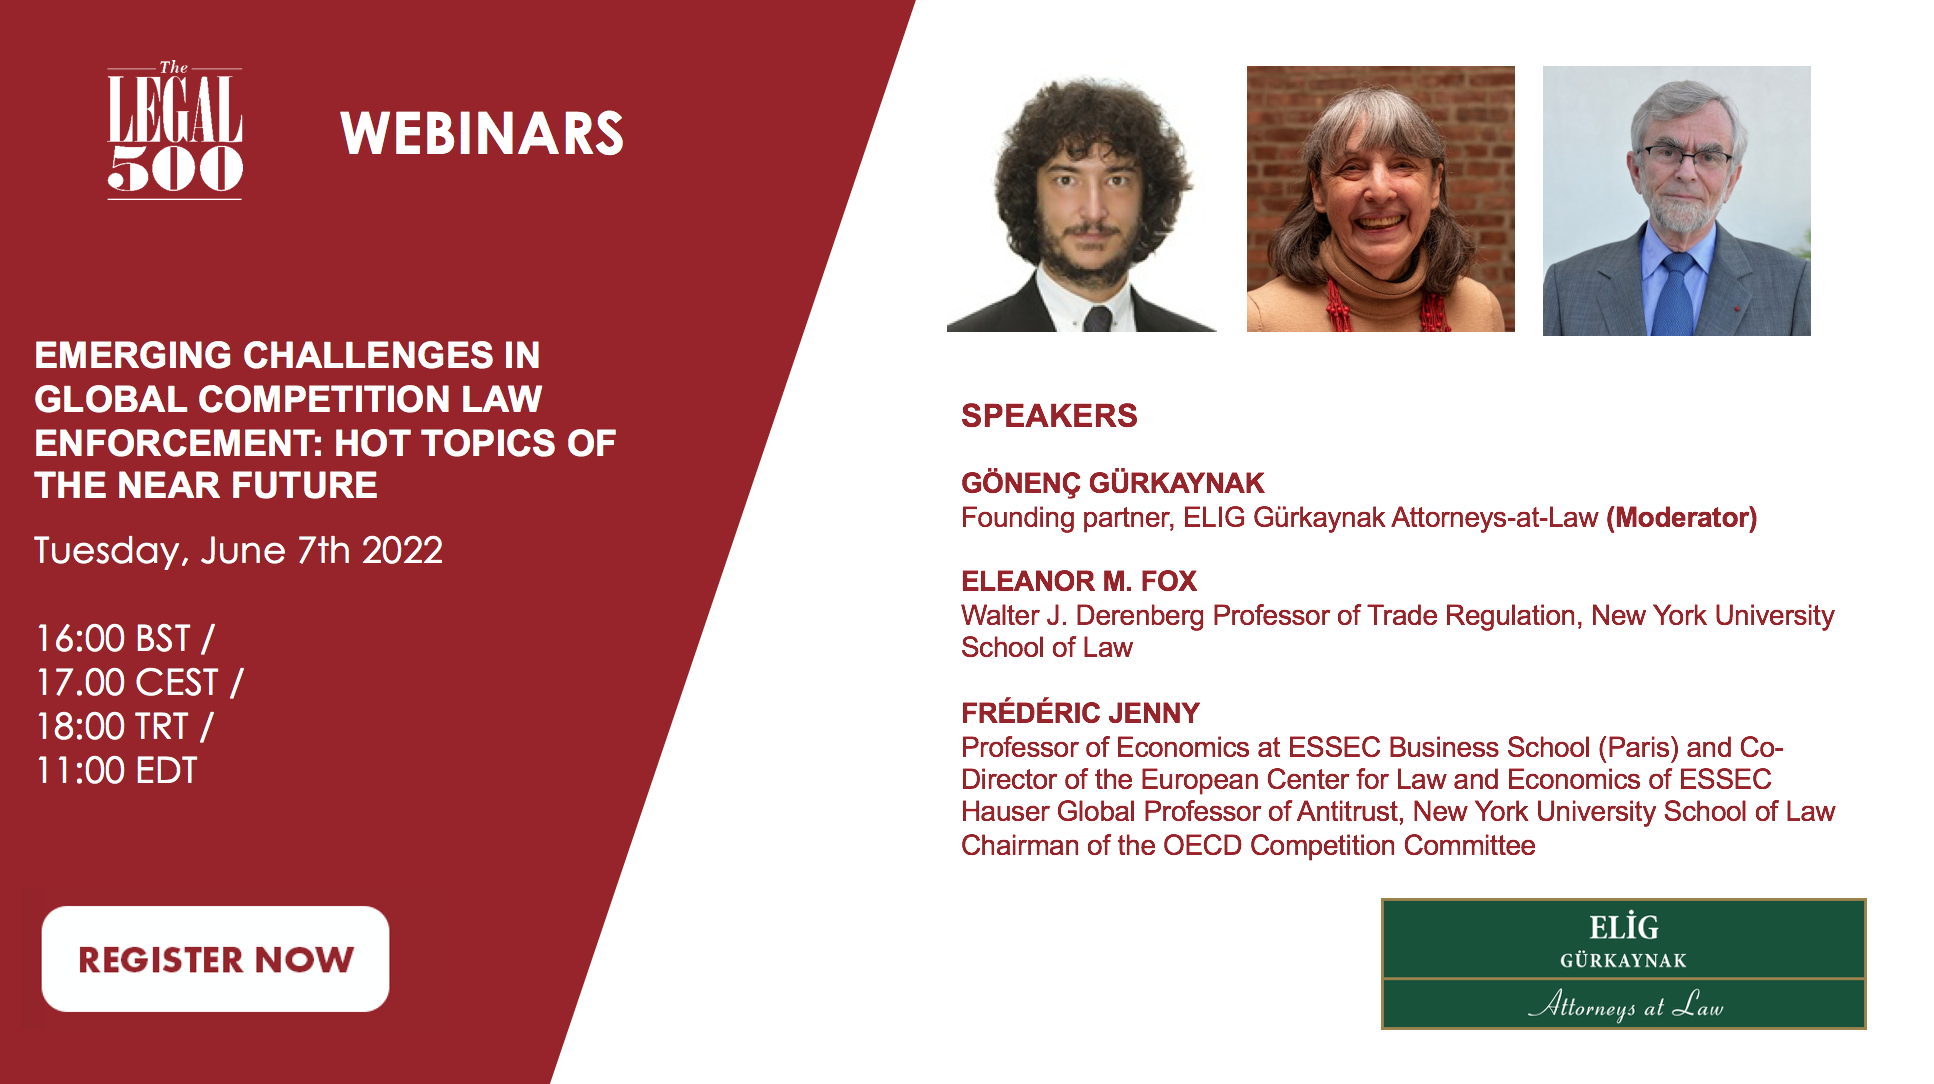 Mr. Gönenç Gürkaynak, the founding partner and head of ELIG Gürkaynak’s competition law and regulatory team, will speak at The Legal 500 webinar entitled “Emerging Challenges in Global Competition Law Enforcement: Hot Topics of the Near Future” on Tuesday, June 7, 2022 at 11:00 EDT / 16:00 UK time / 17:00 CET / 18:00 Turkish time.